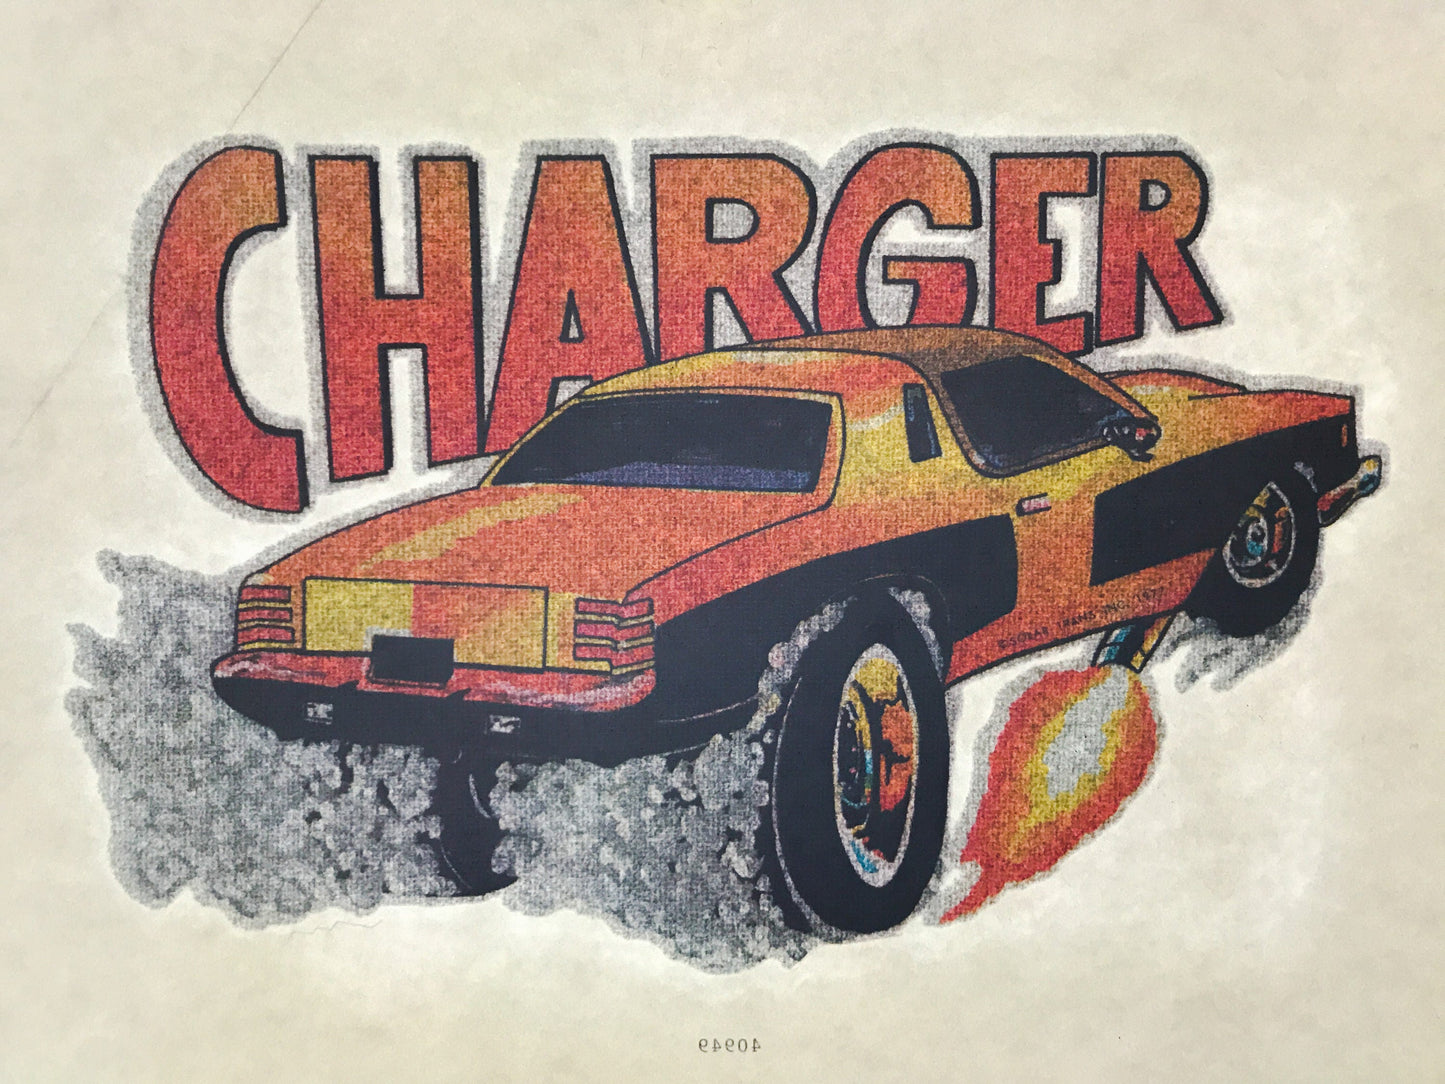 Dodge Charger Vintage Iron On Heat Transfer